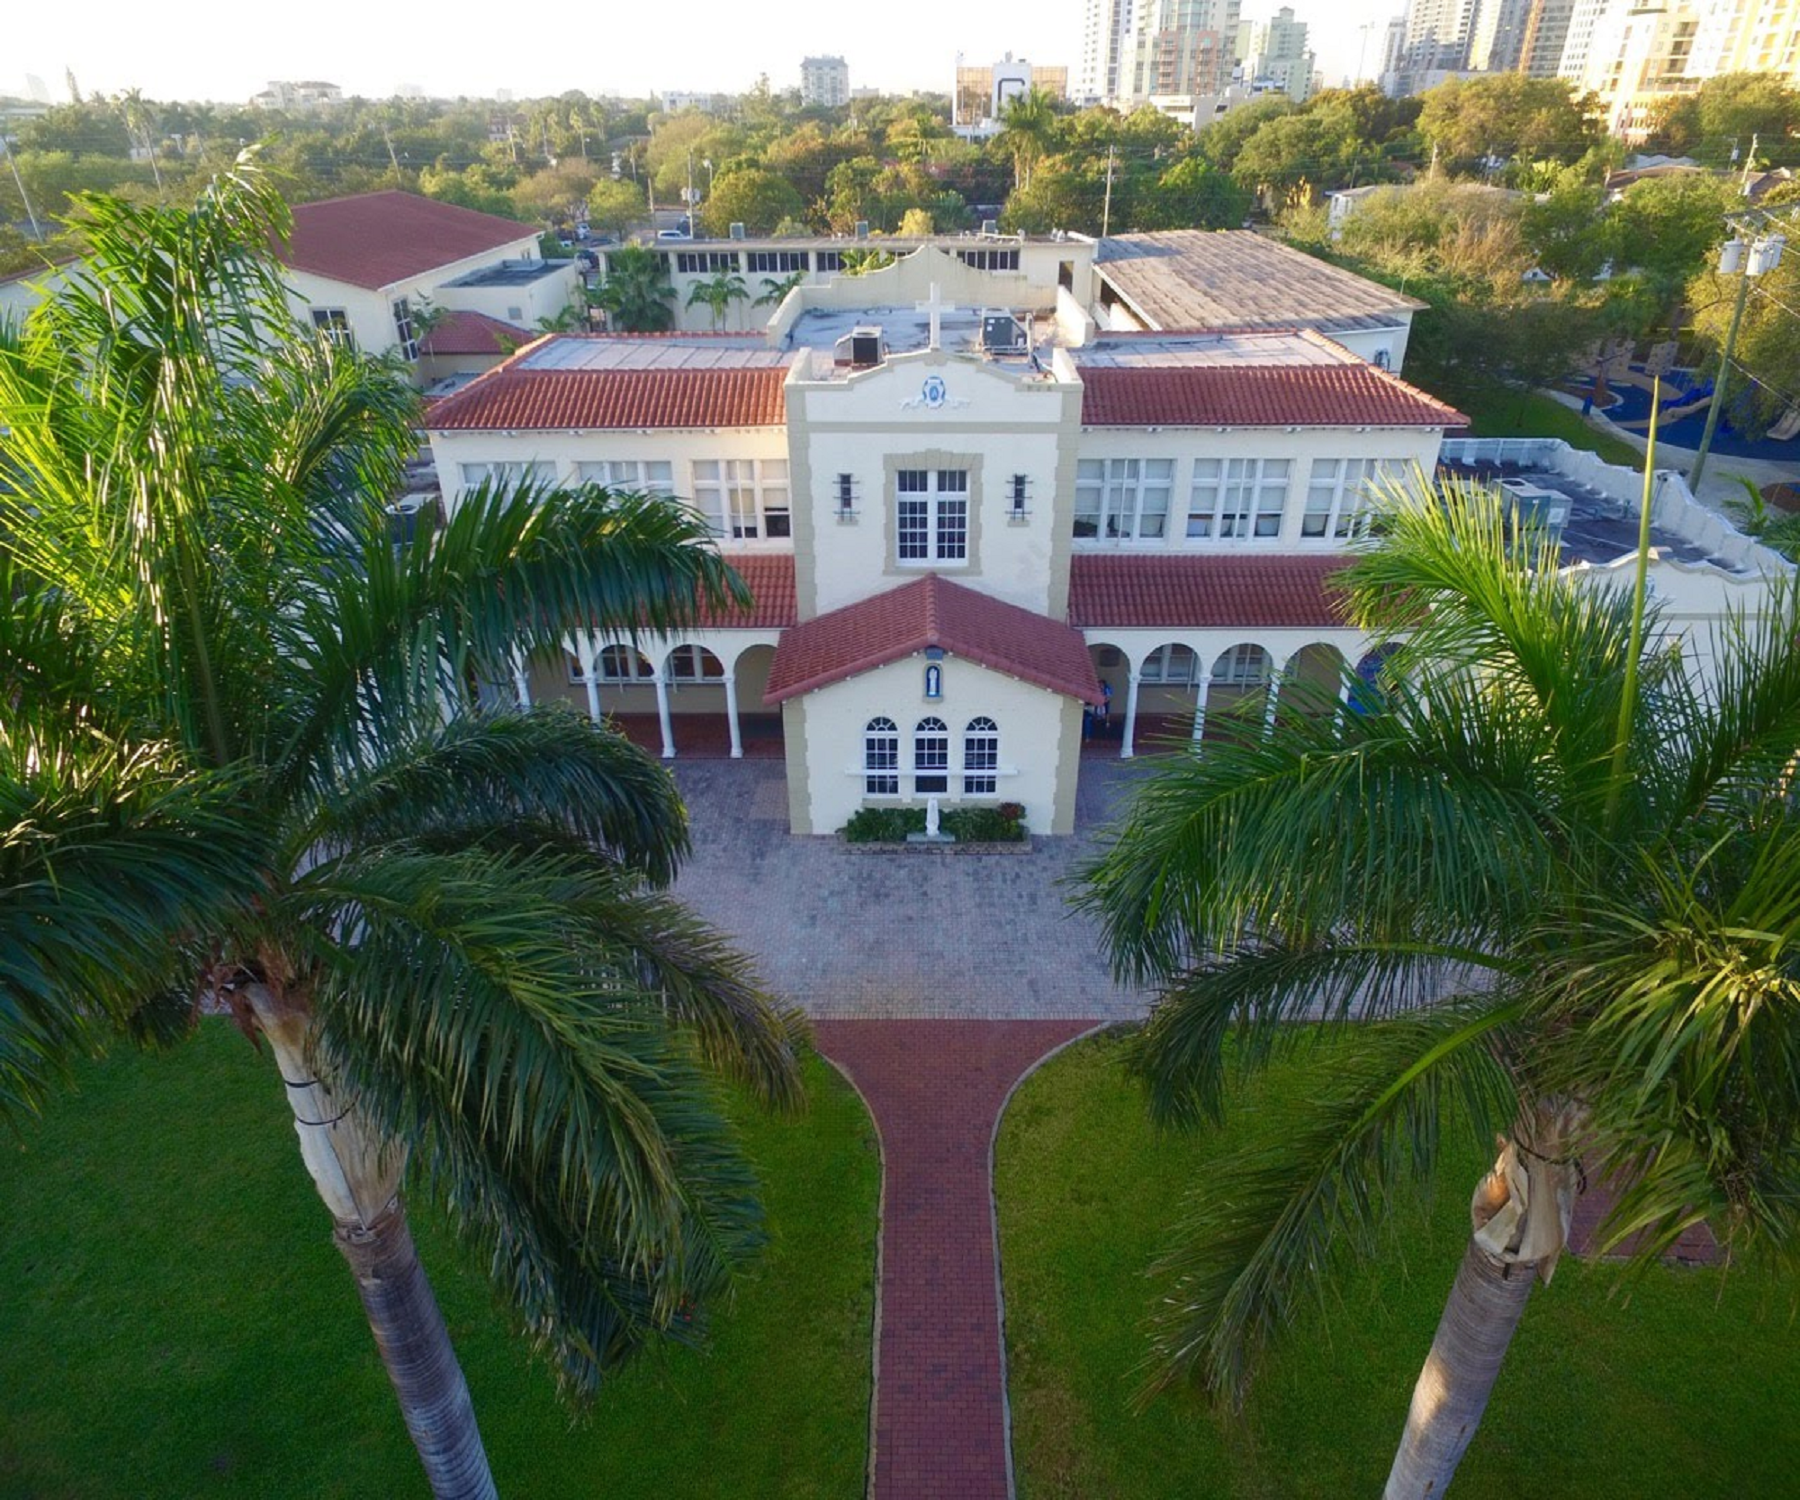 an aerial view of a large white building with a red tile roof